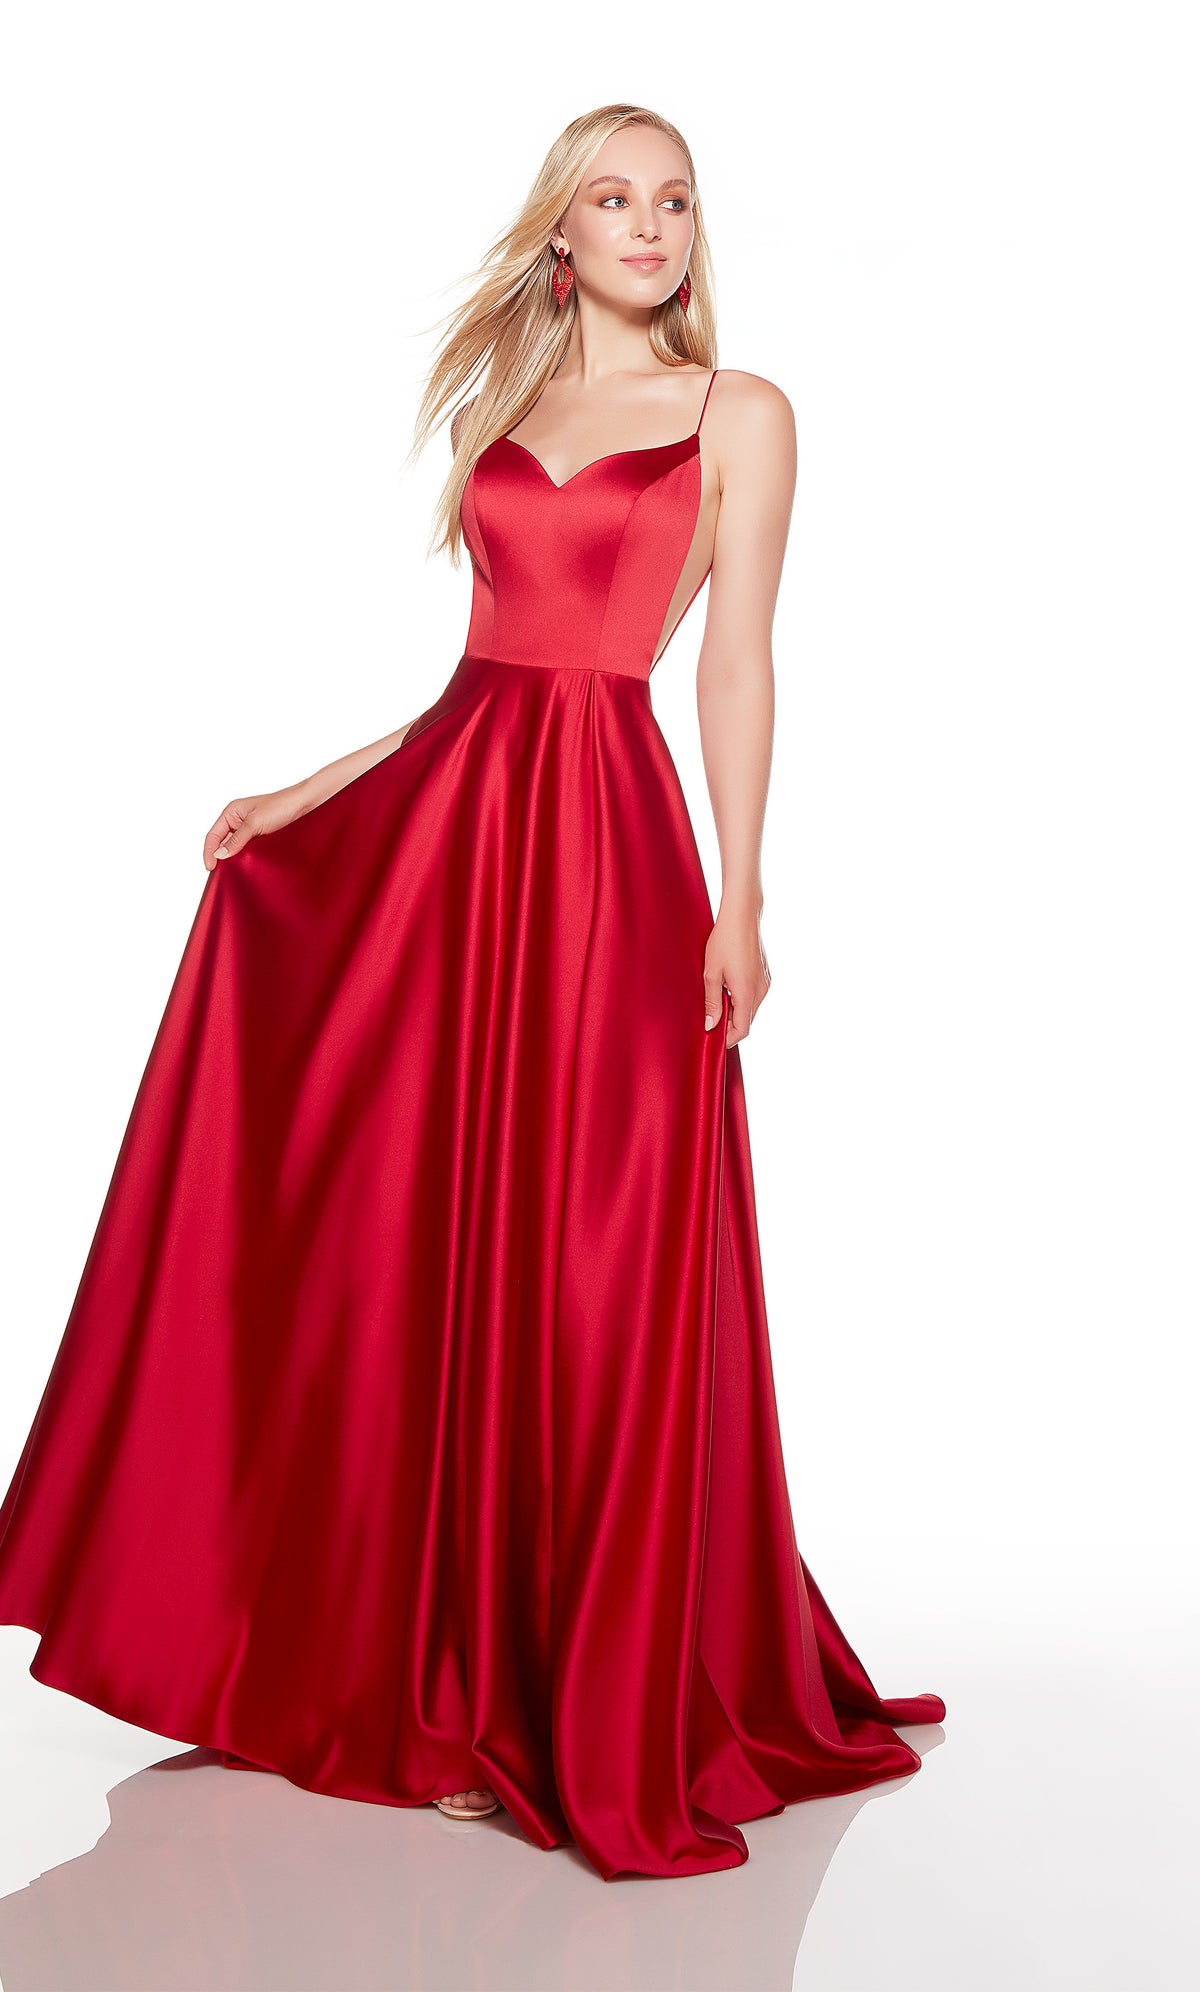 Red formal dress with a sweetheart neckline and high slit.